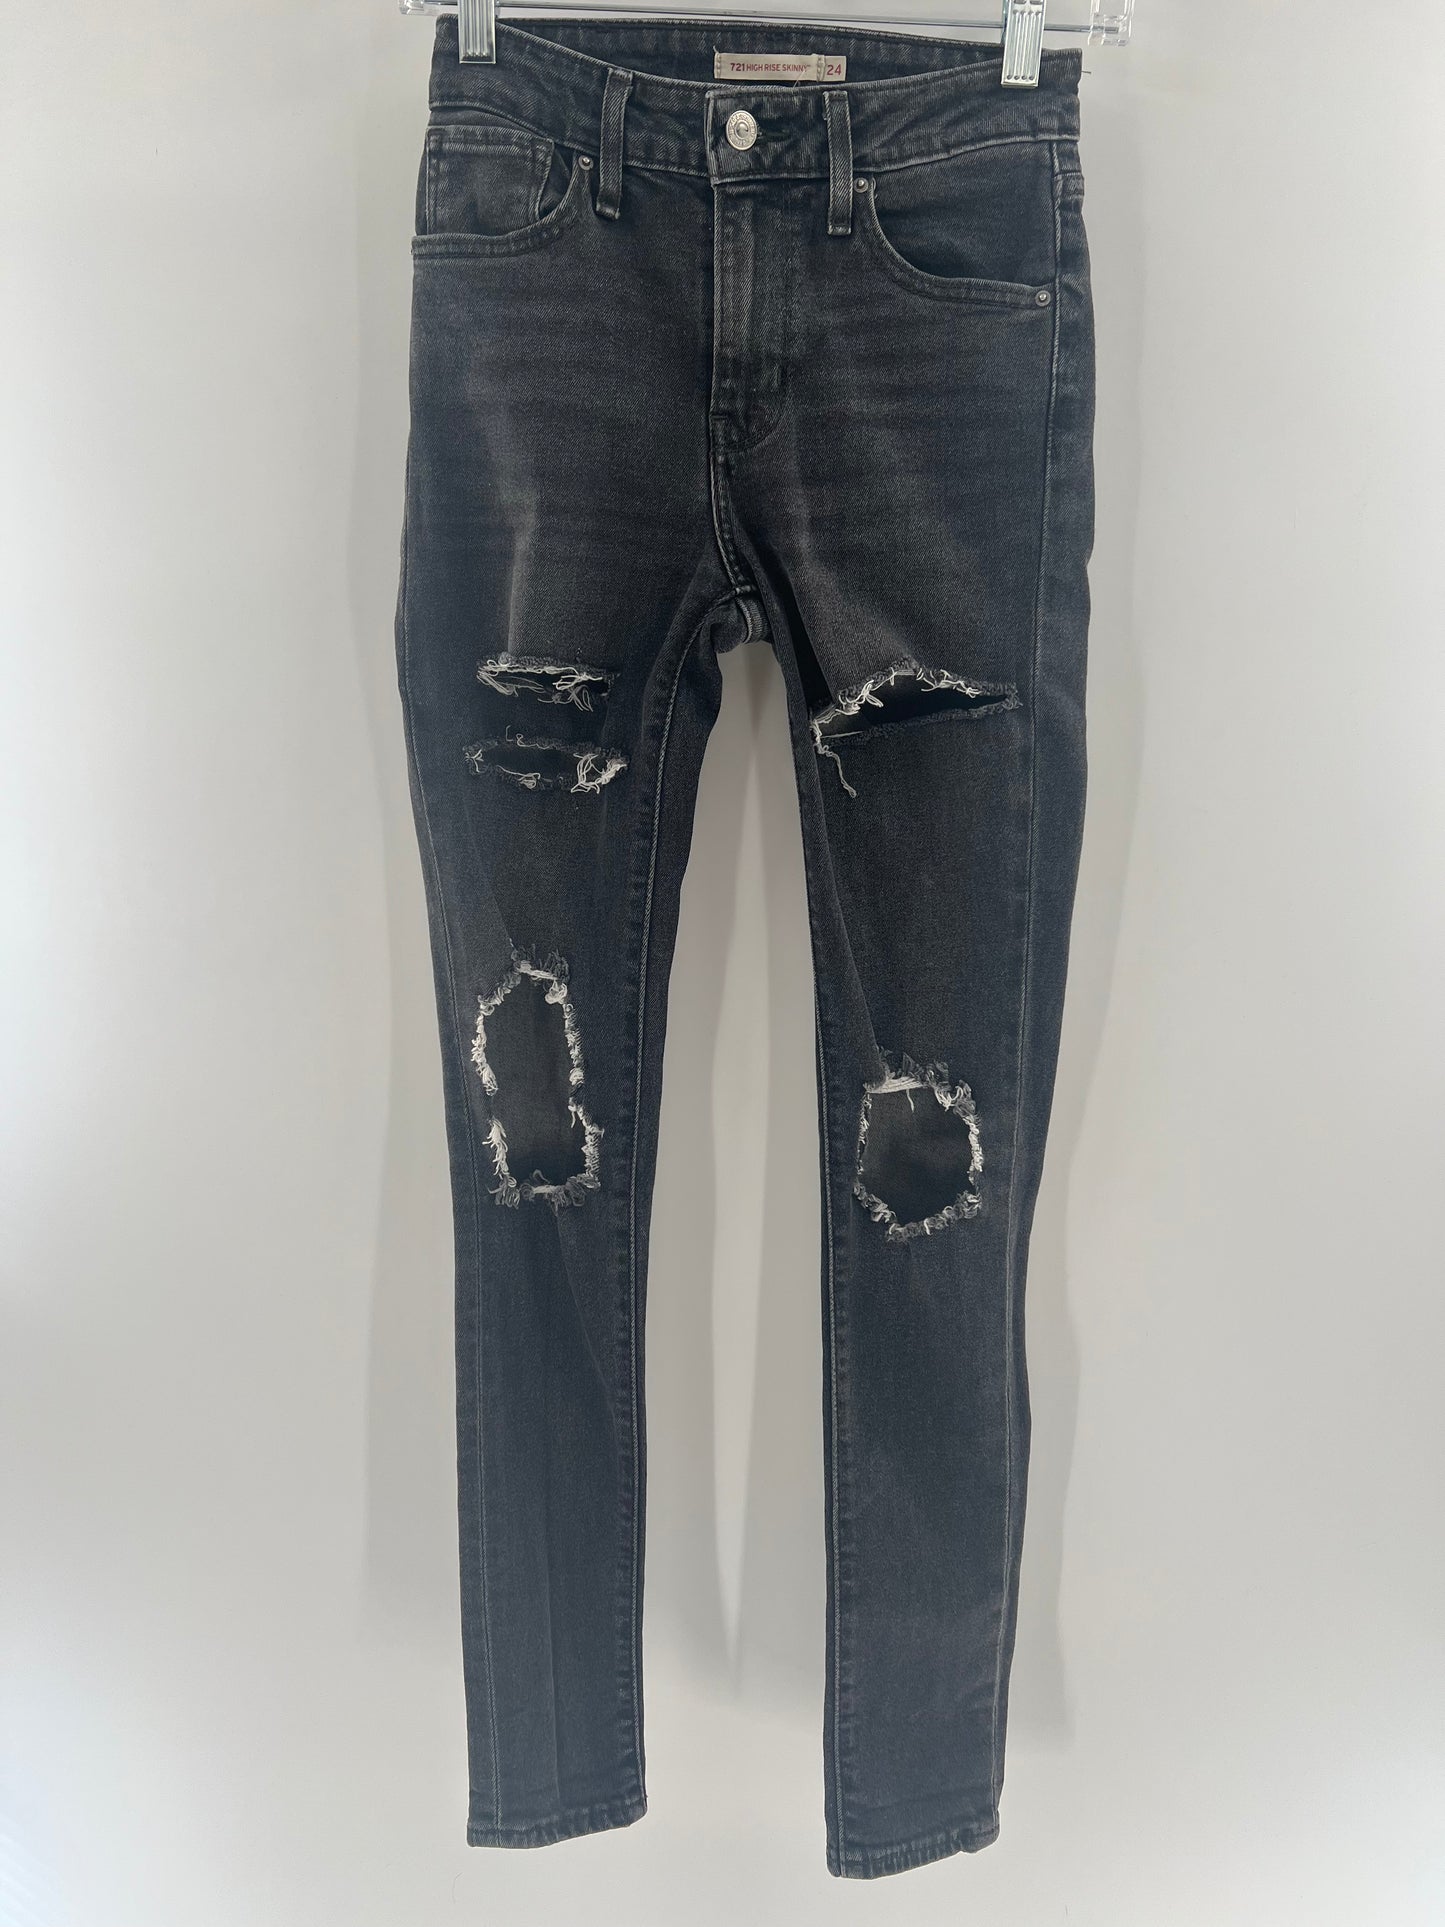 Levi Strauss Ripped 721 High Rise Skinny Jeans (Size 24)